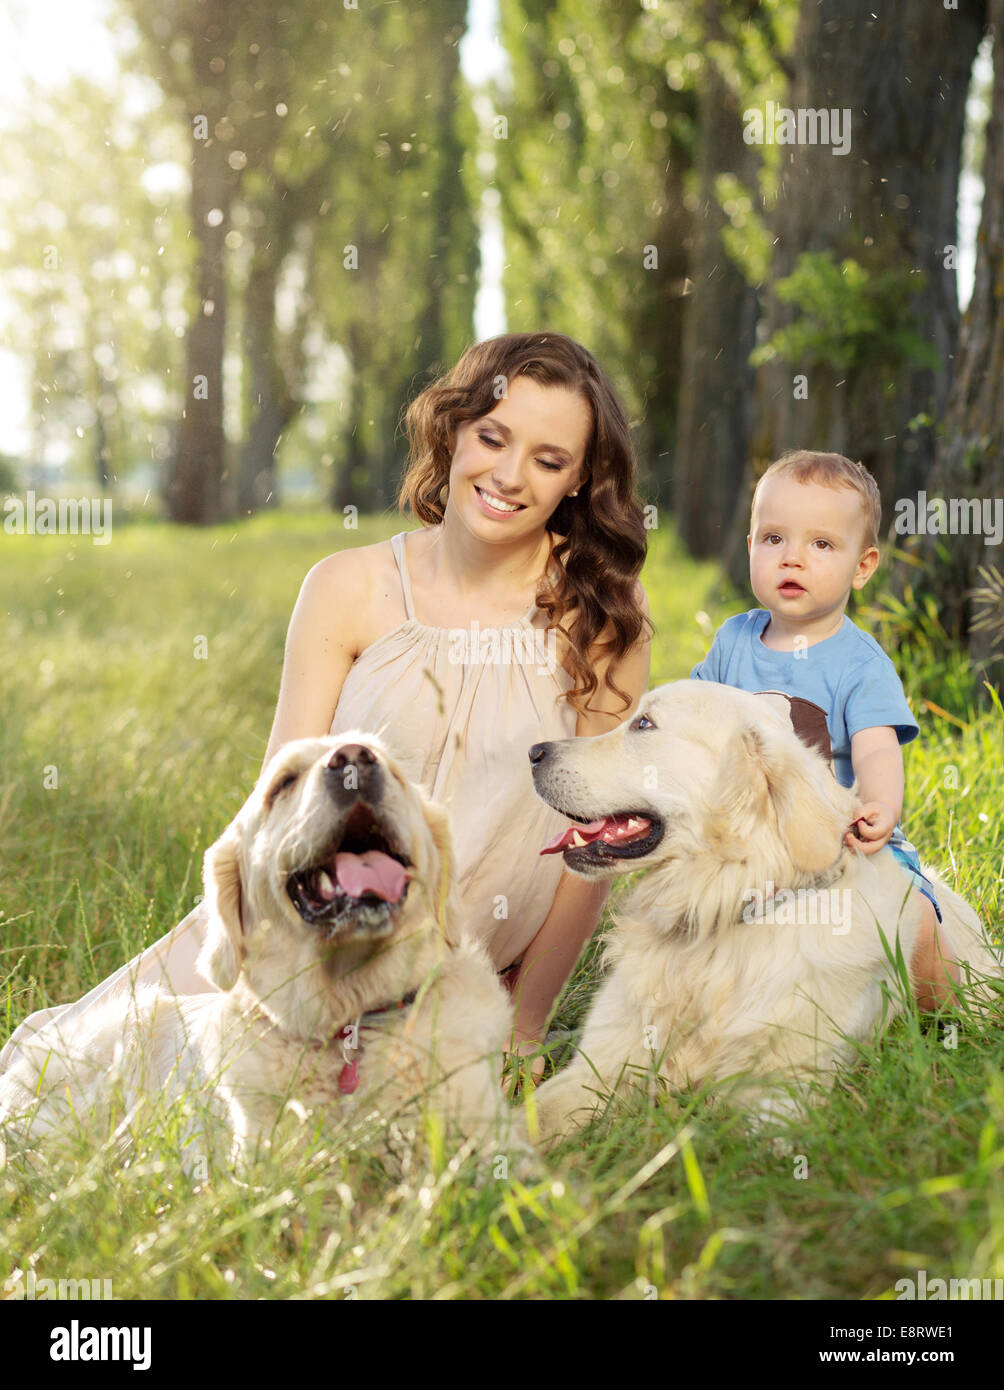 Charming woman with kid and two dogs Stock Photo